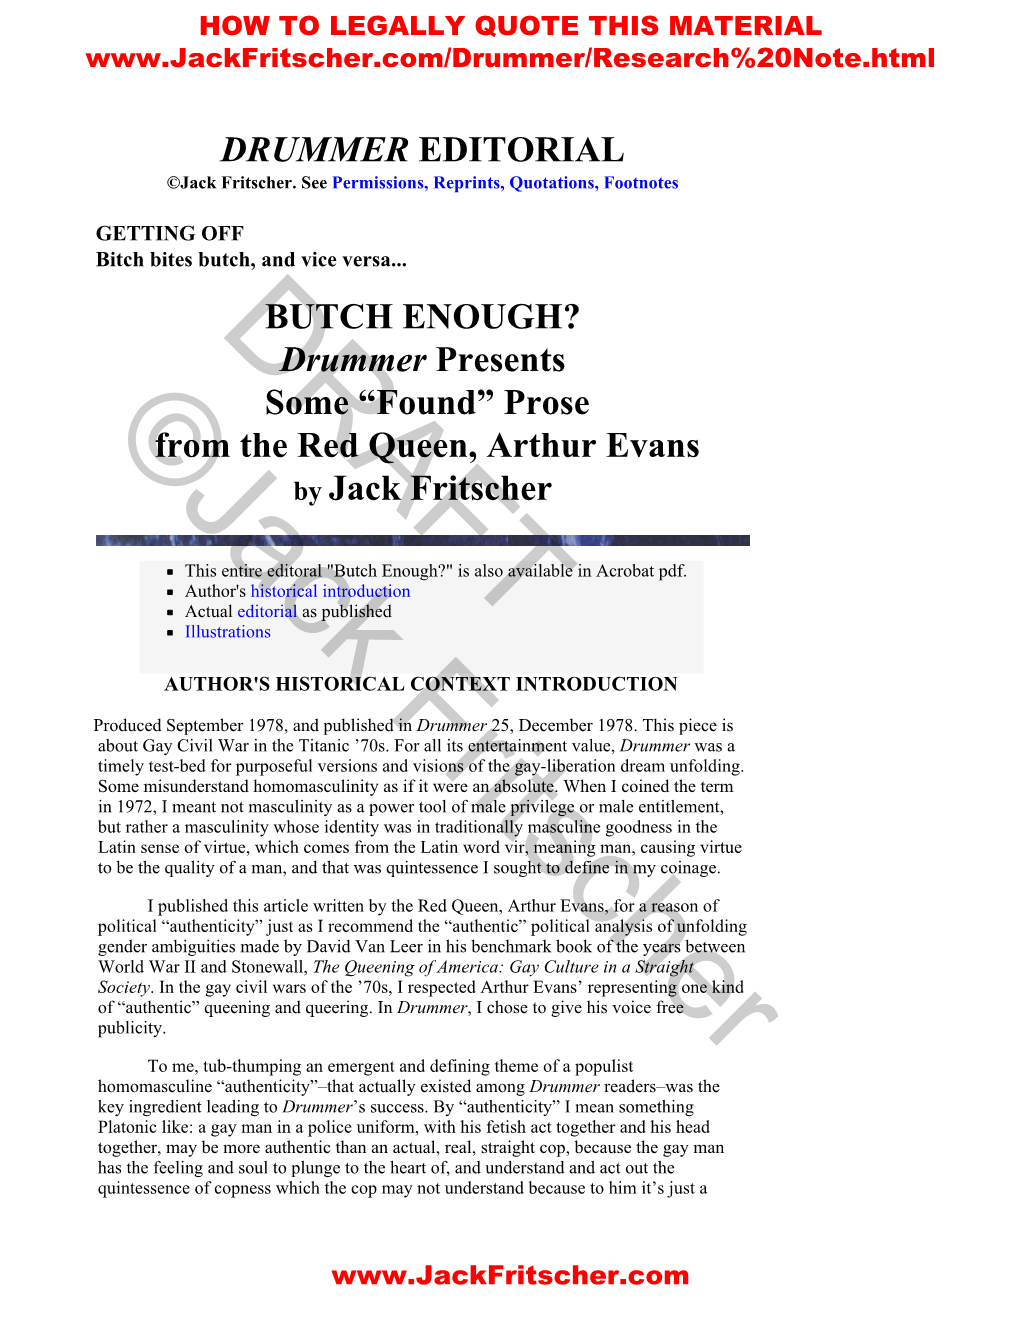 BUTCH ENOUGH? Drummer Presents Some “Found” Prose ©Jack from the Red Queen, Arthur Evans by Jack Fritscher